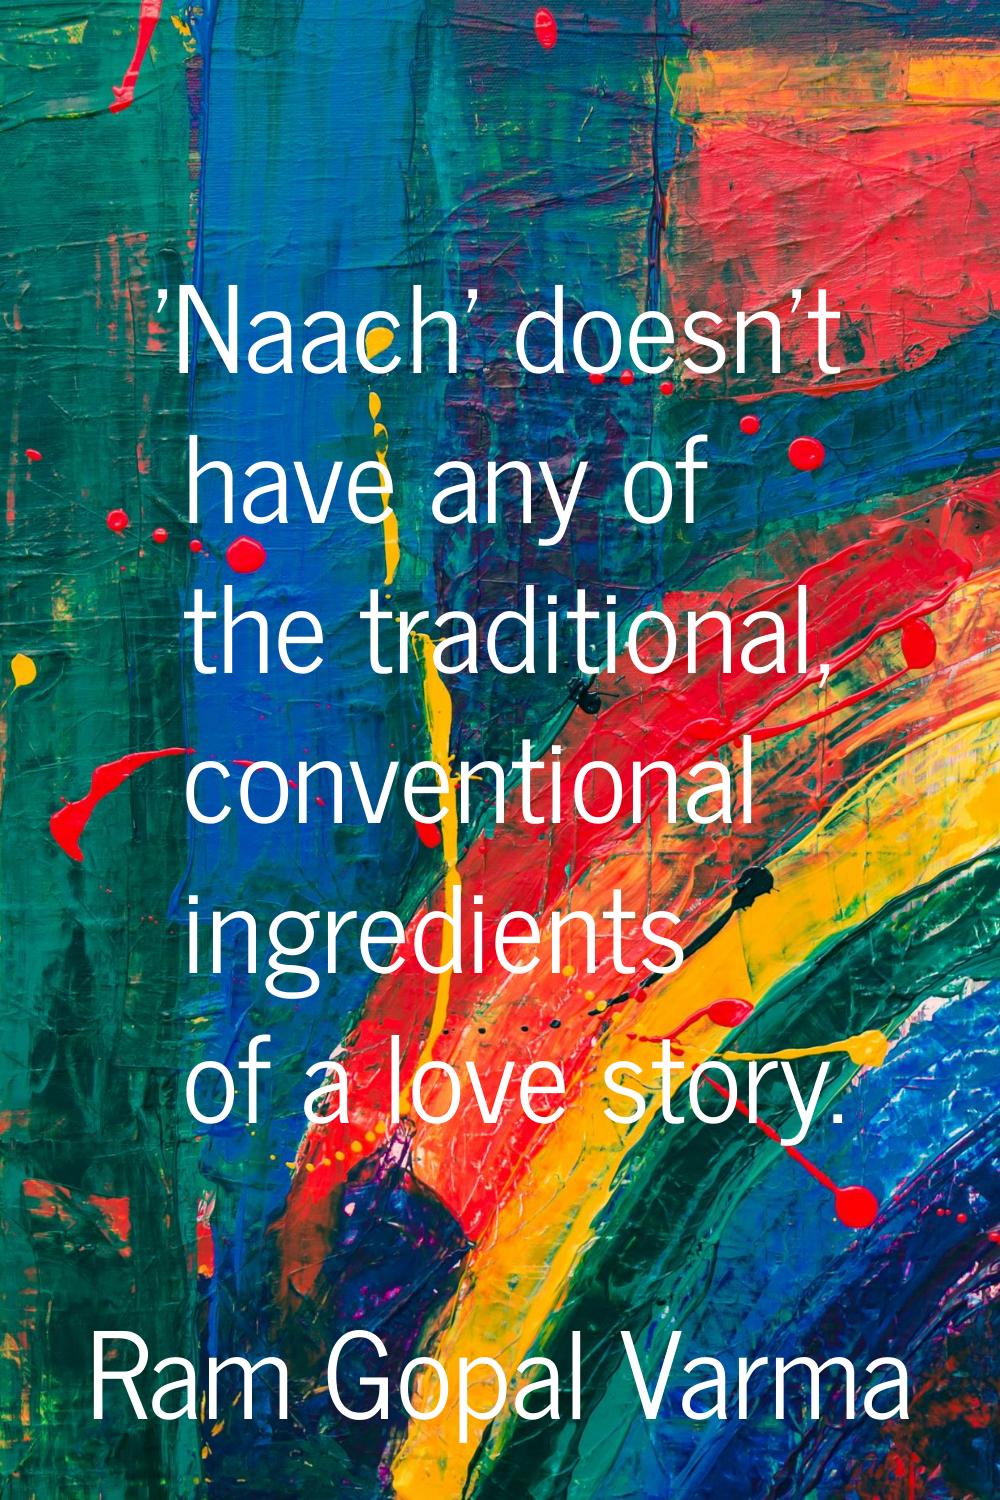 'Naach' doesn't have any of the traditional, conventional ingredients of a love story.